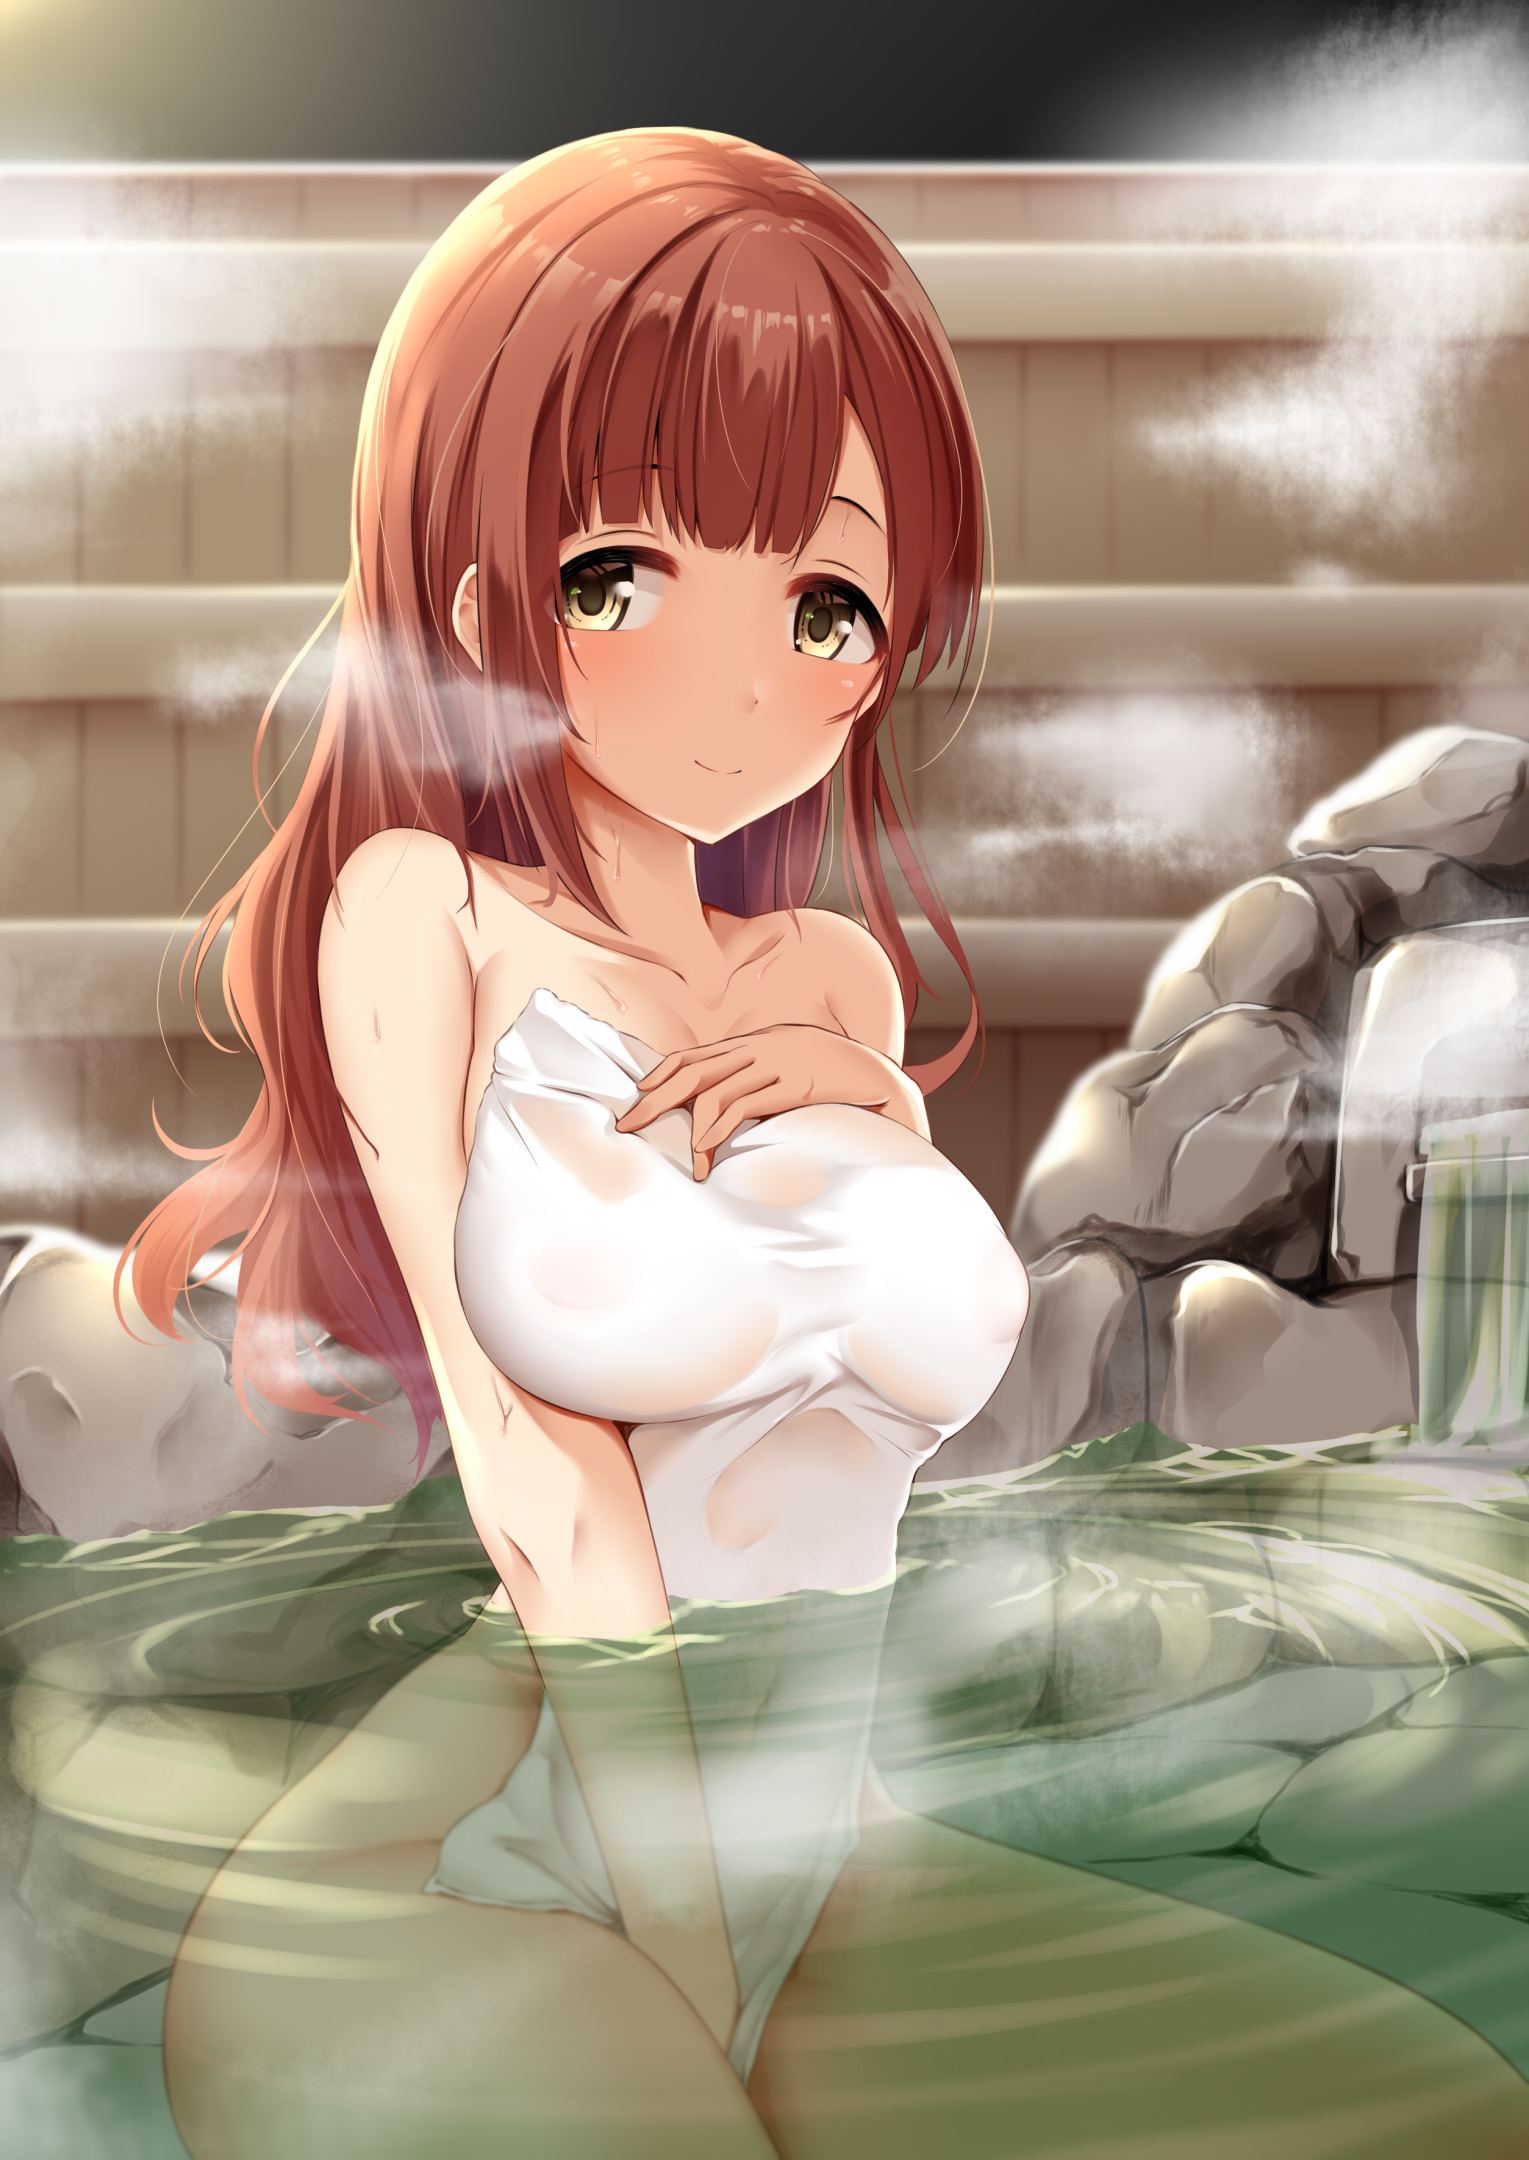 Anime 1529x2160 anime anime girls thighs big boobs THE iDOLM@STER: Cinderella Girls Igarashi Kyouko vertical hand between legs towel nude strategic covering hot spring brunette smiling THE iDOLM@STER Yigra Don bathing sitting